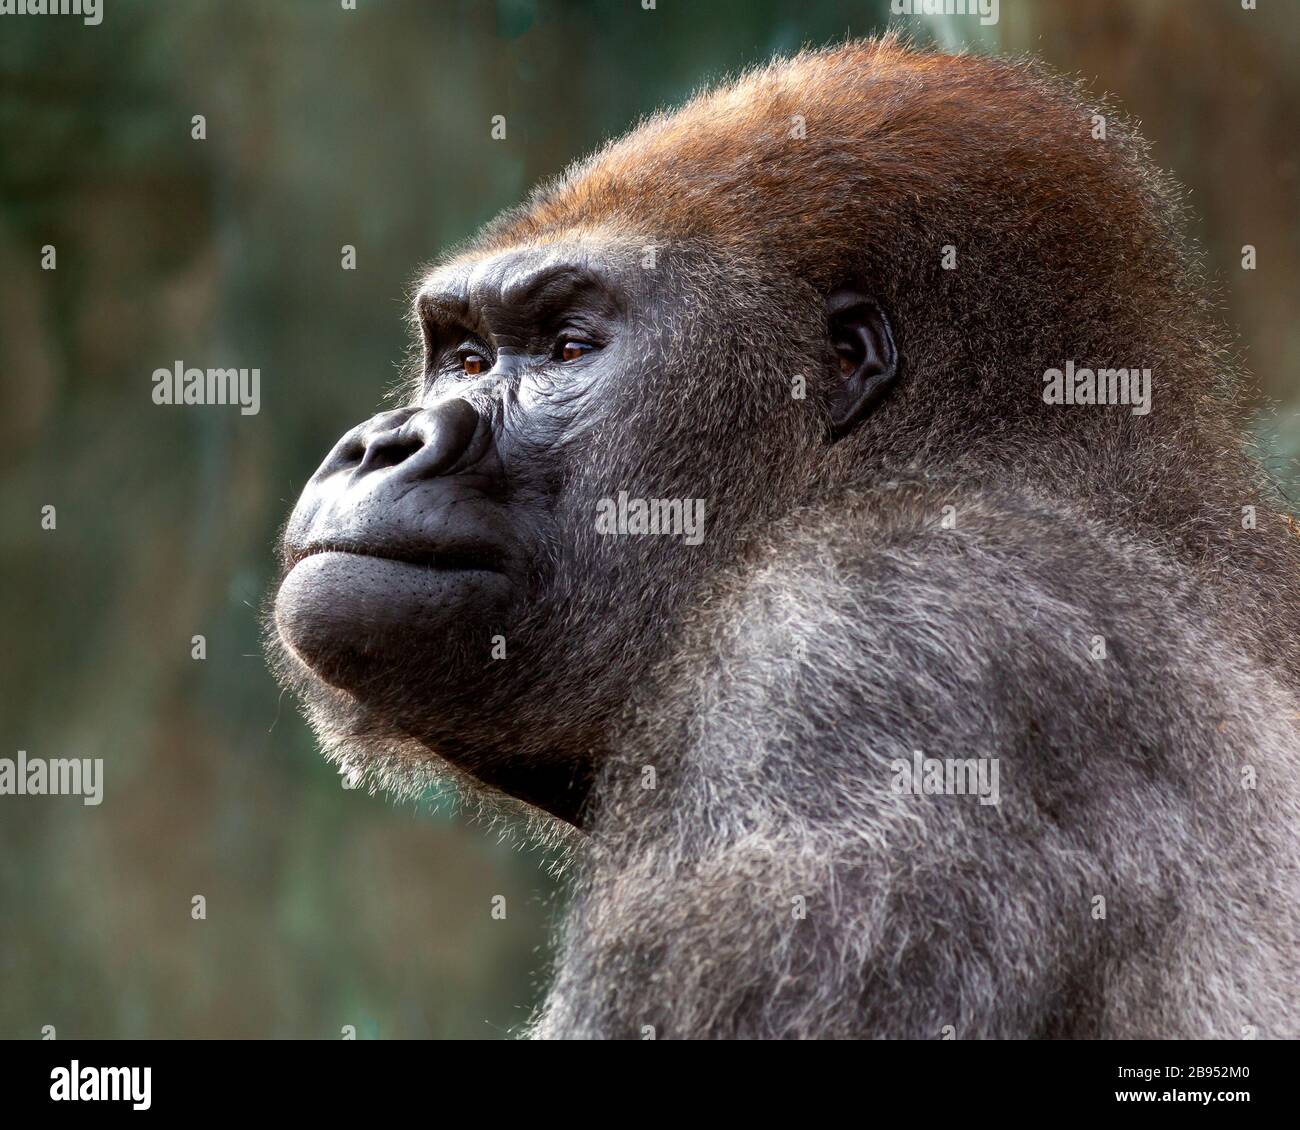 Close-up portrait of a silver-back gorilla thoughtfully looking into the distance Stock Photo